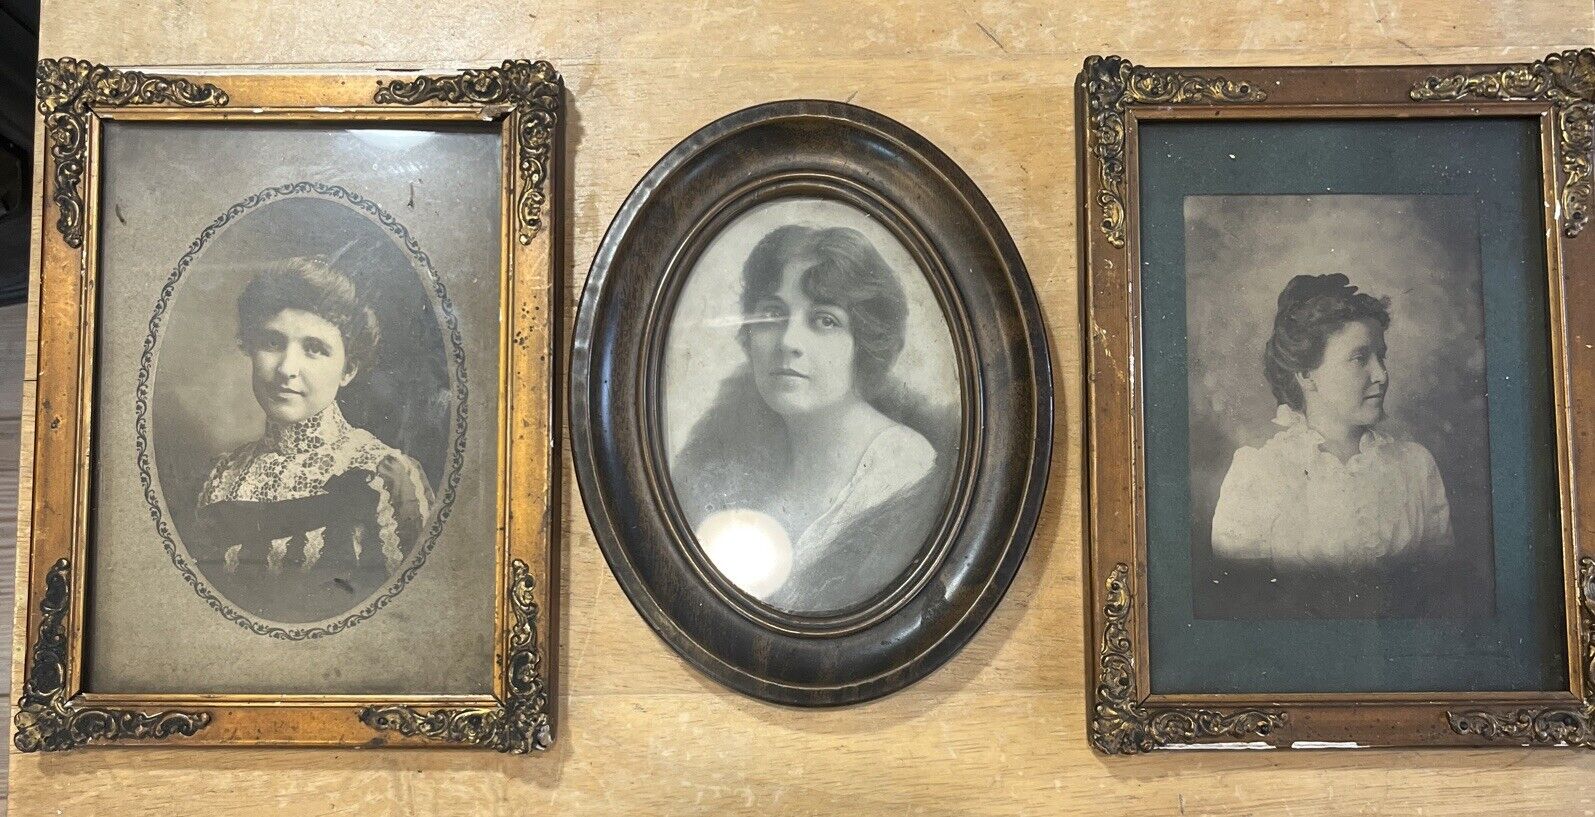 Antique Small Framed Oval Photo & 2 Other Framed Antique Photos 6X8 Frame